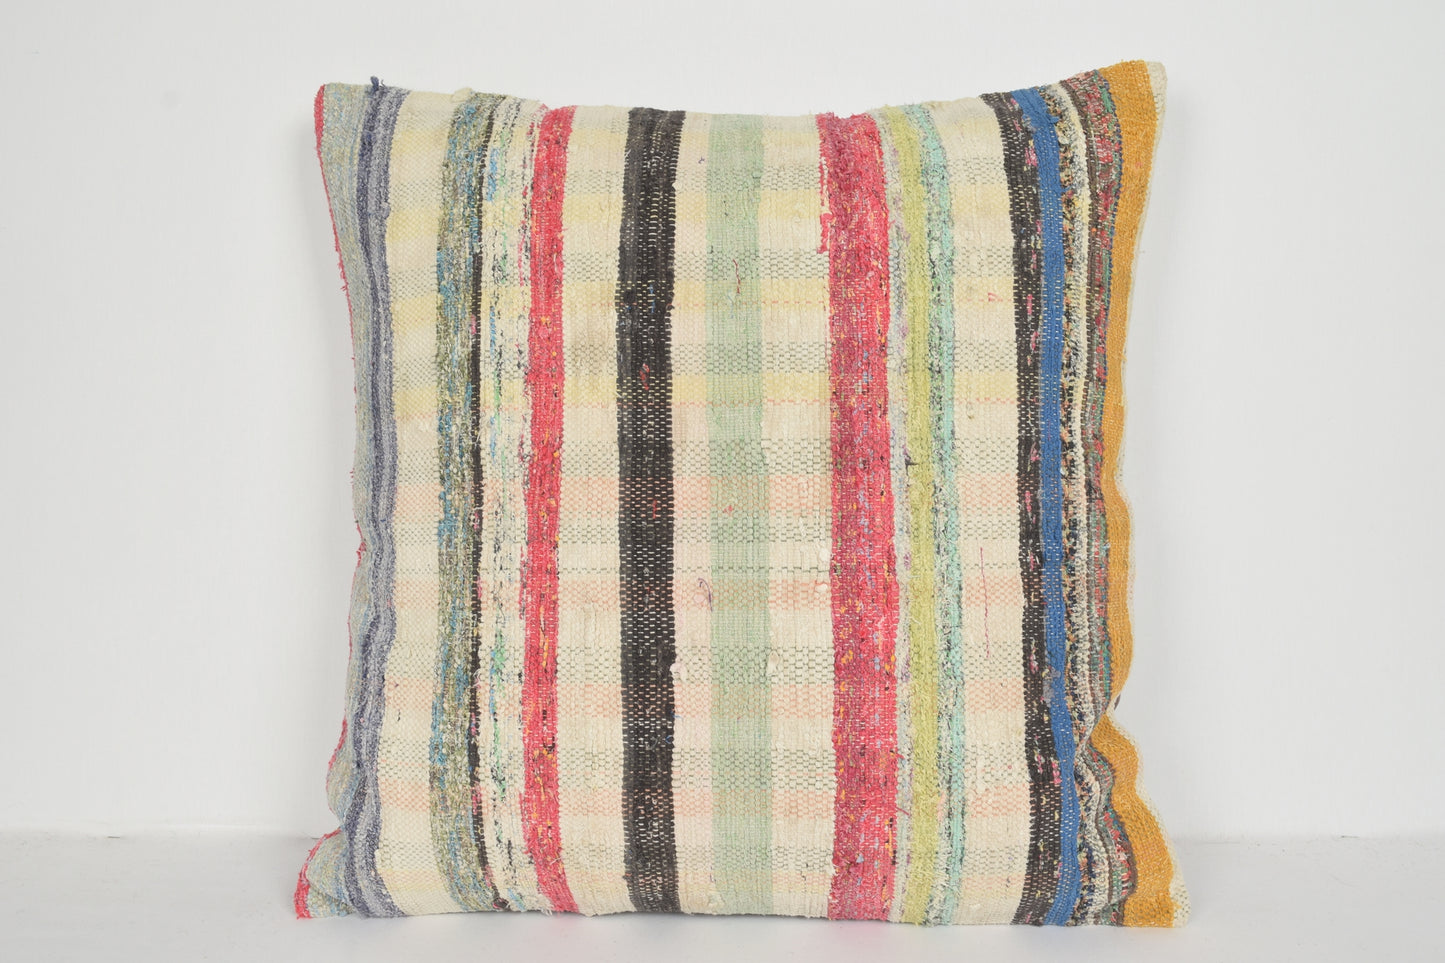 Moroccan Kilim Cushion Covers A00782 Woven pillow cover 24x24 Country pillow covers